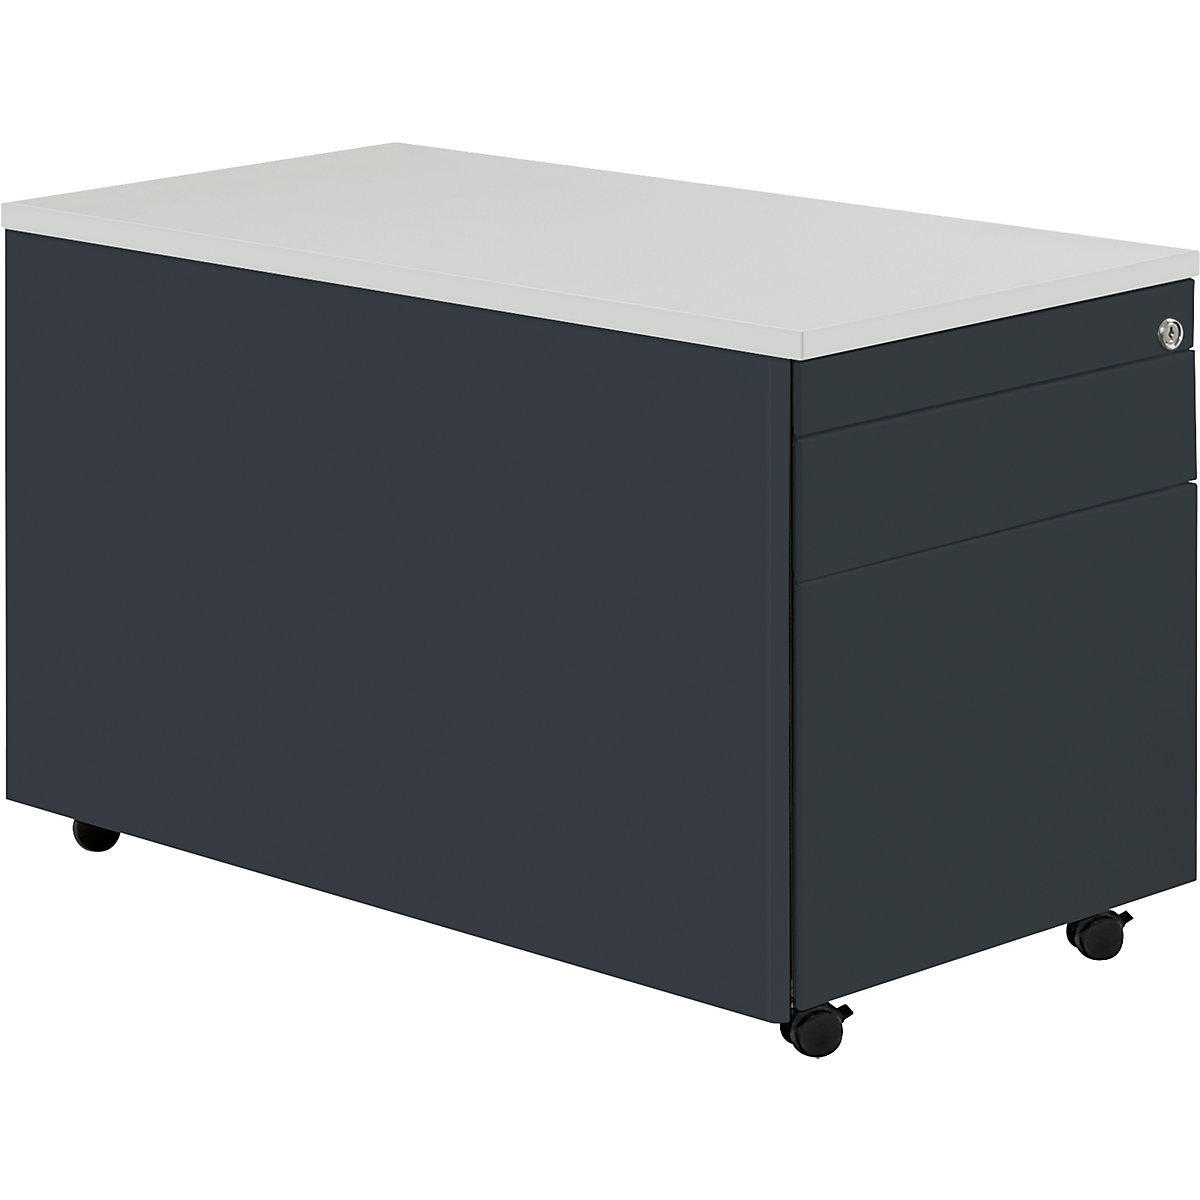 Drawer pedestal with castors – mauser, HxD 529 x 800 mm, 1 drawer, 1 suspension file drawer, charcoal / charcoal / light grey-3